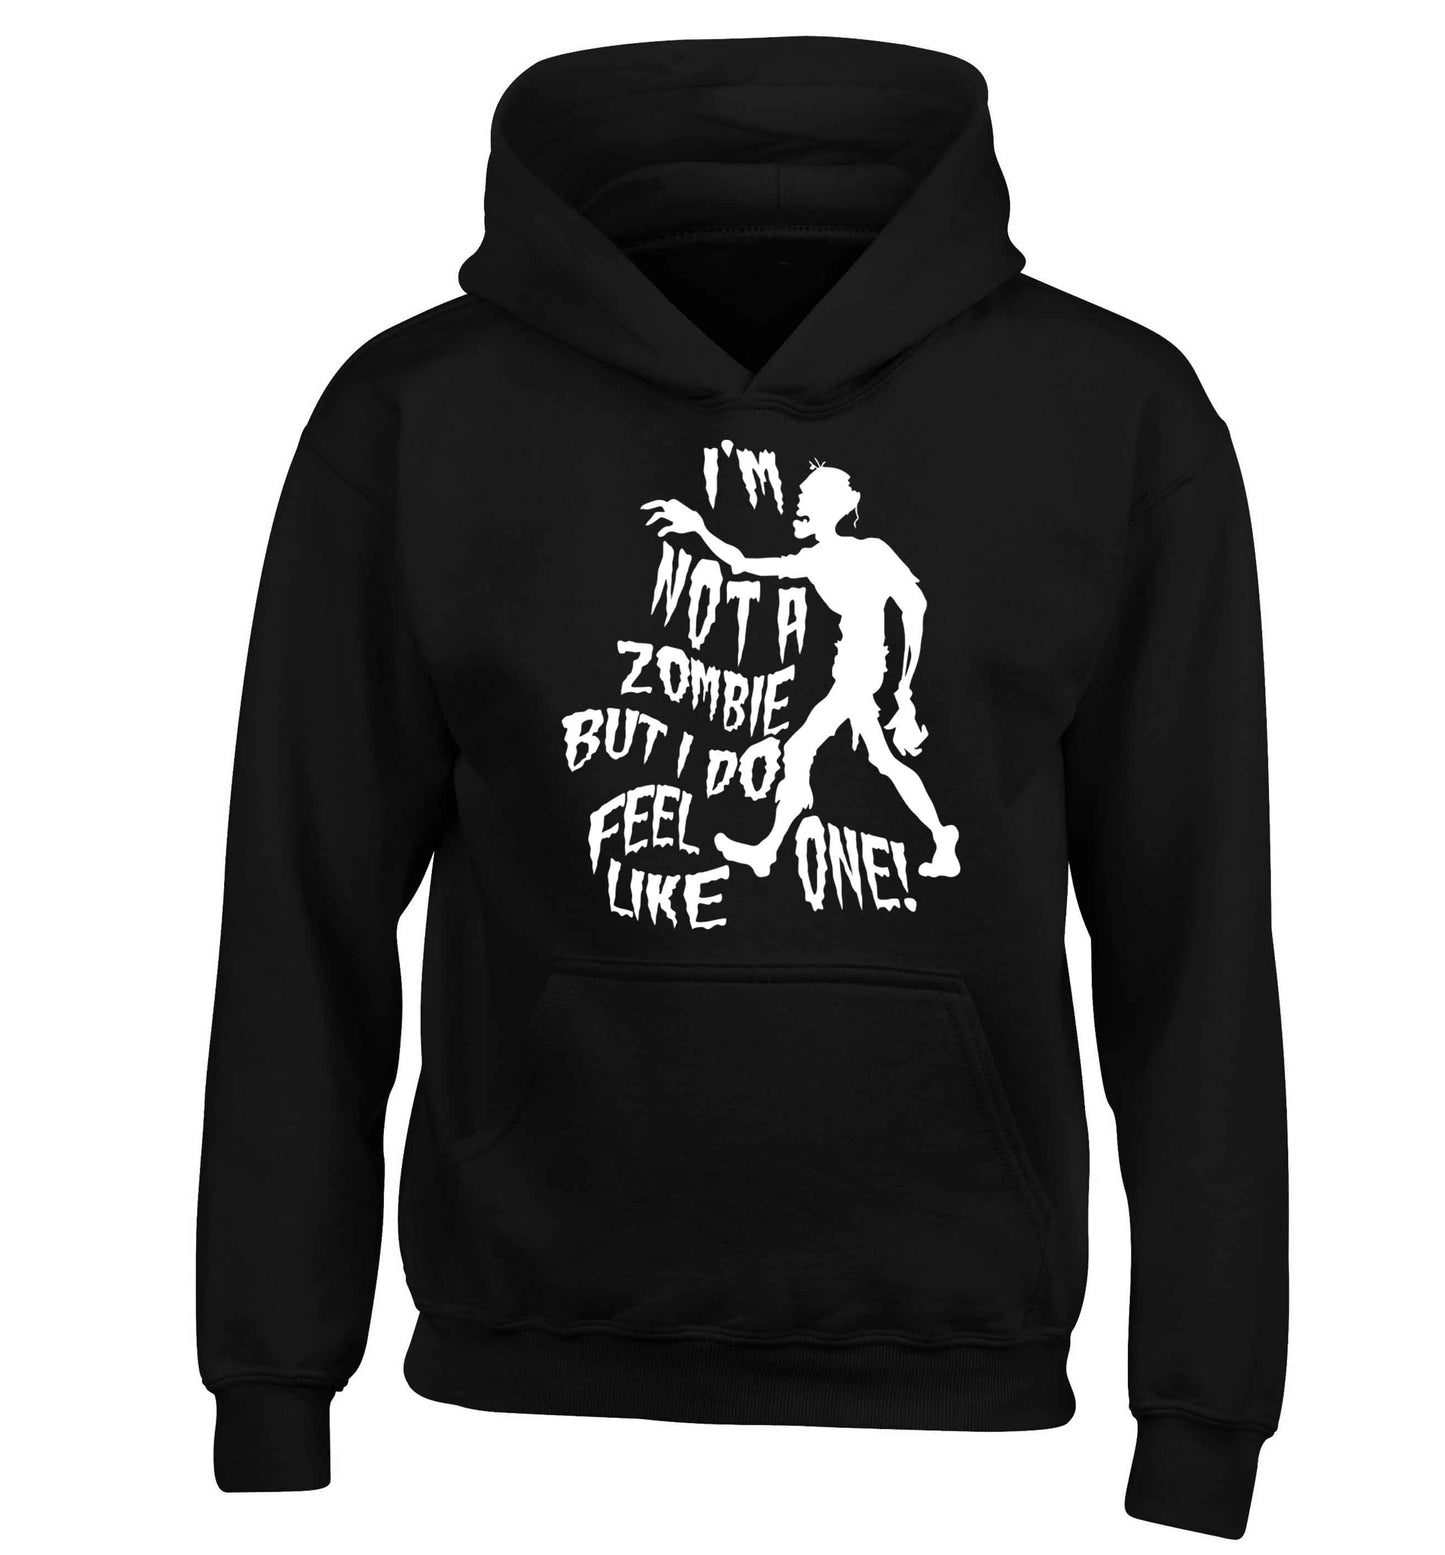 I'm not a zombie but I do feel like one! children's black hoodie 12-13 Years